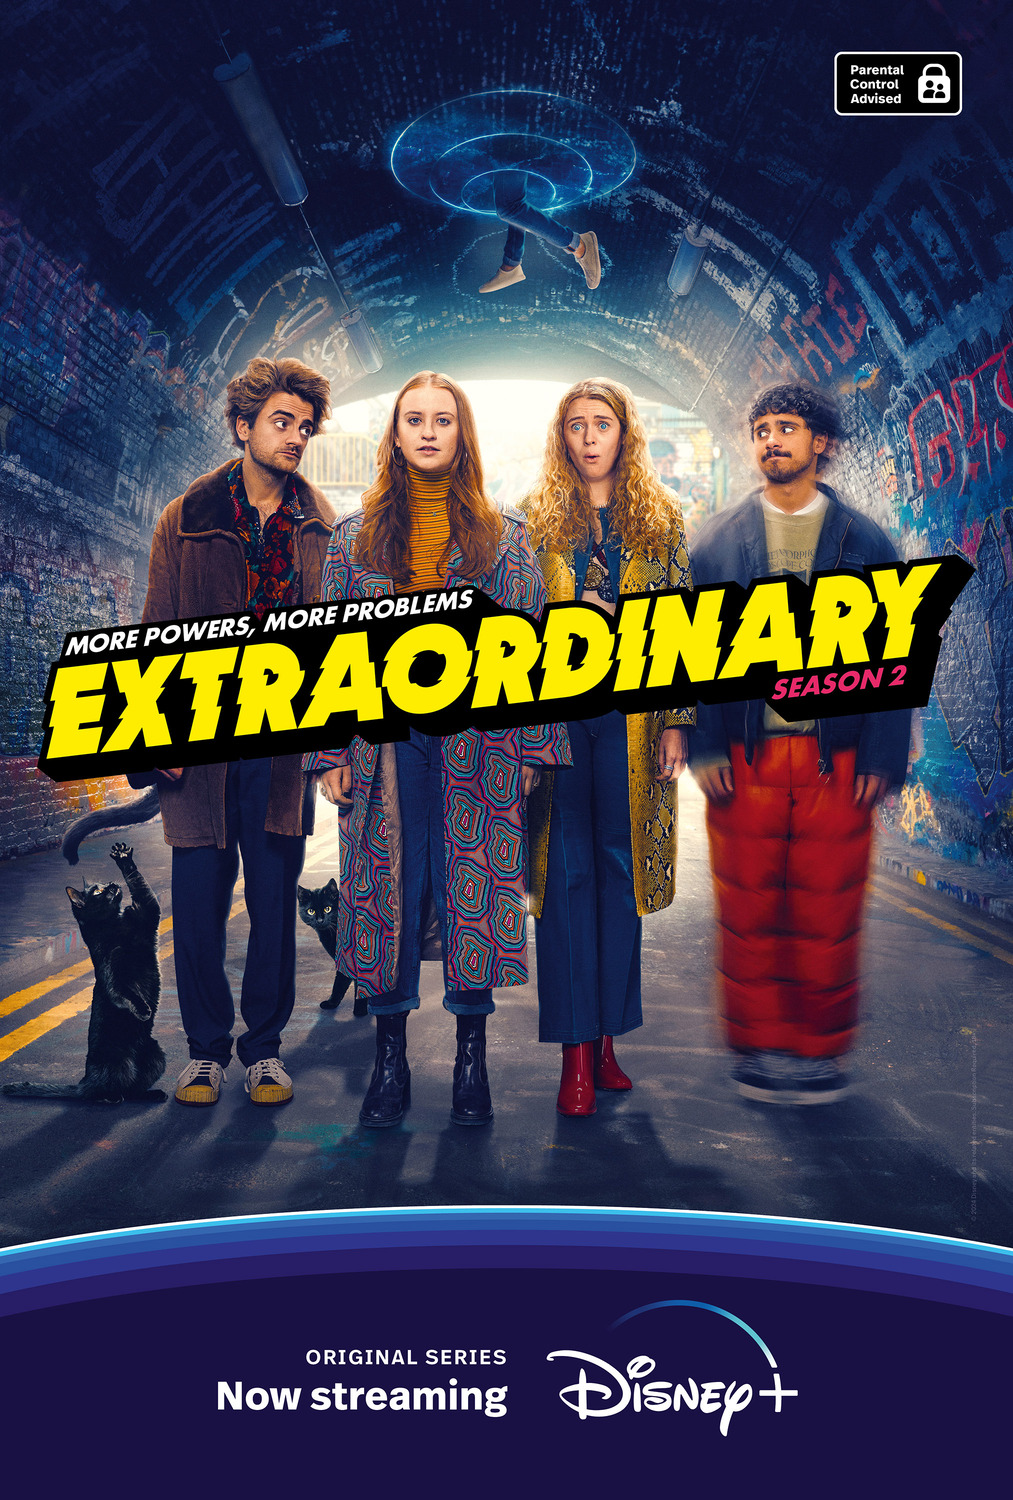 Extra Large TV Poster Image for Extraordinary (#3 of 3)